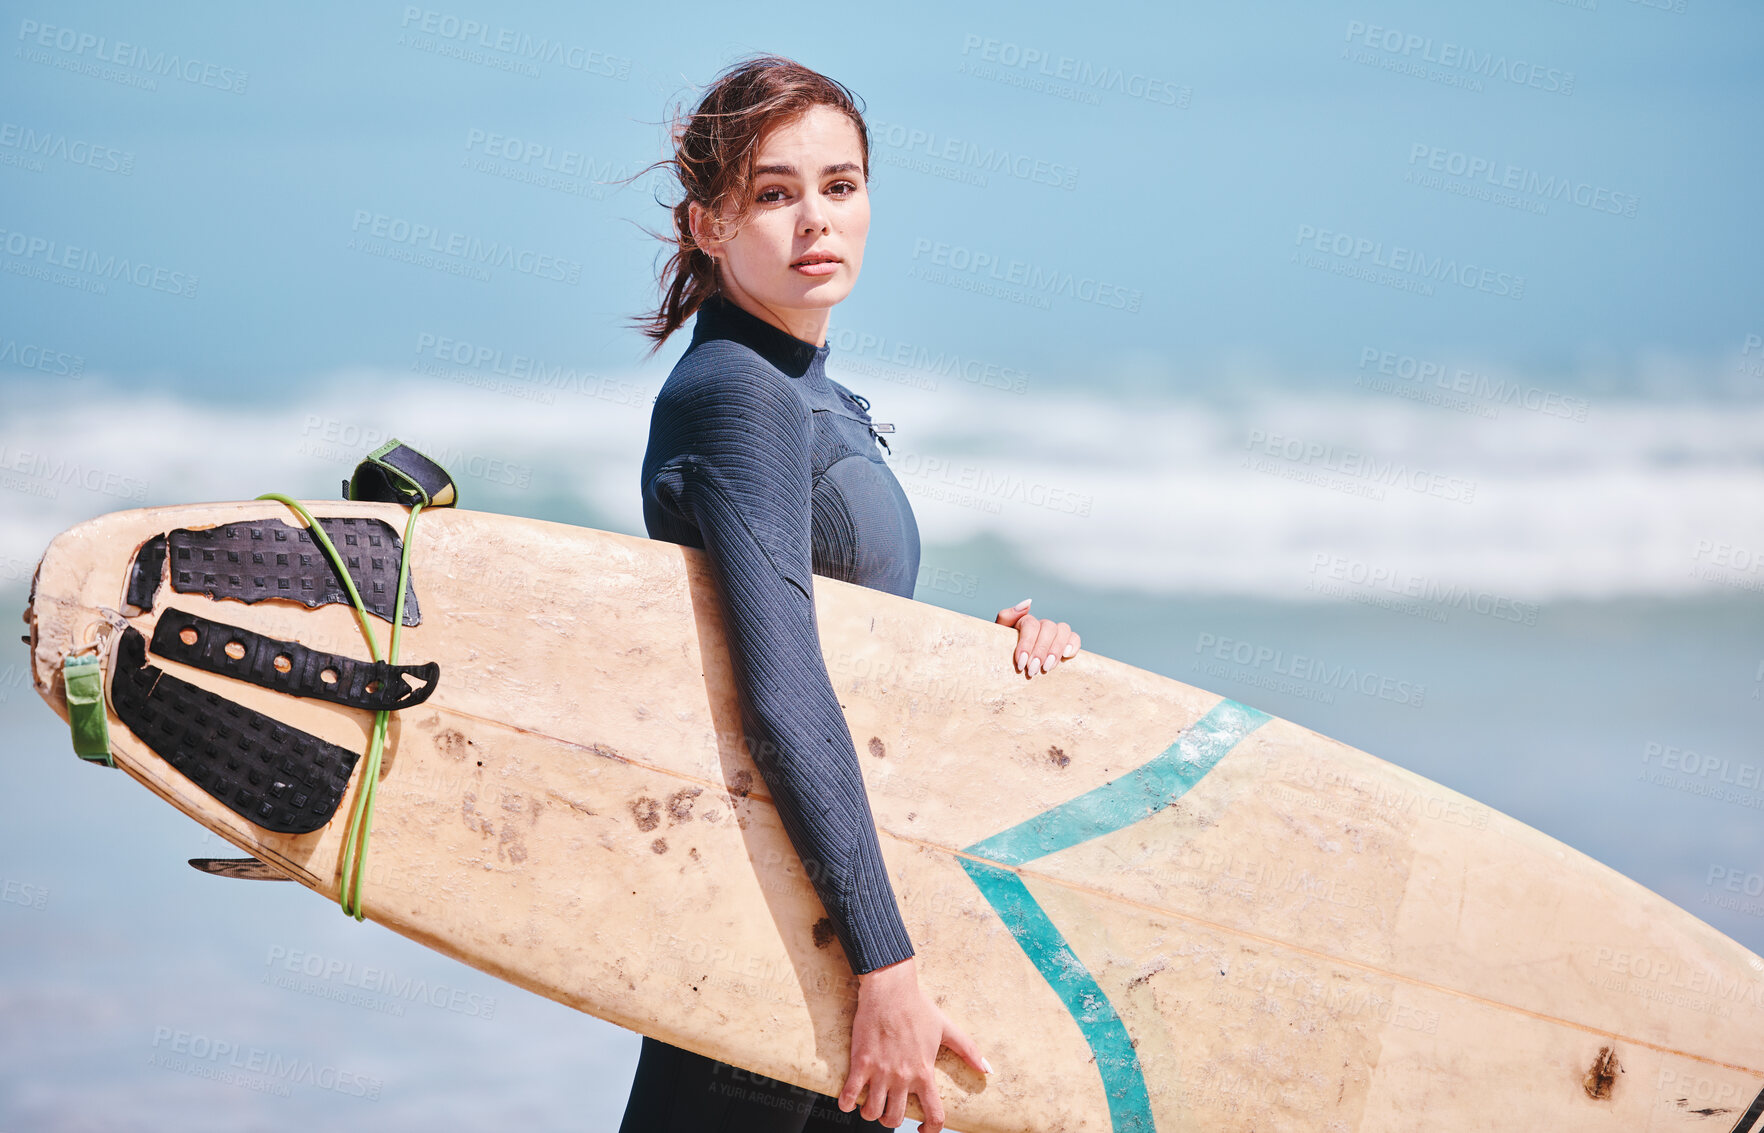 Buy stock photo Portrait of beautiful caucasian woman standing alone on a beach, holding a surfboard and wearing a wetsuit before surfing in the sea. Active and athletic woman getting ready to surf waves as a hobby